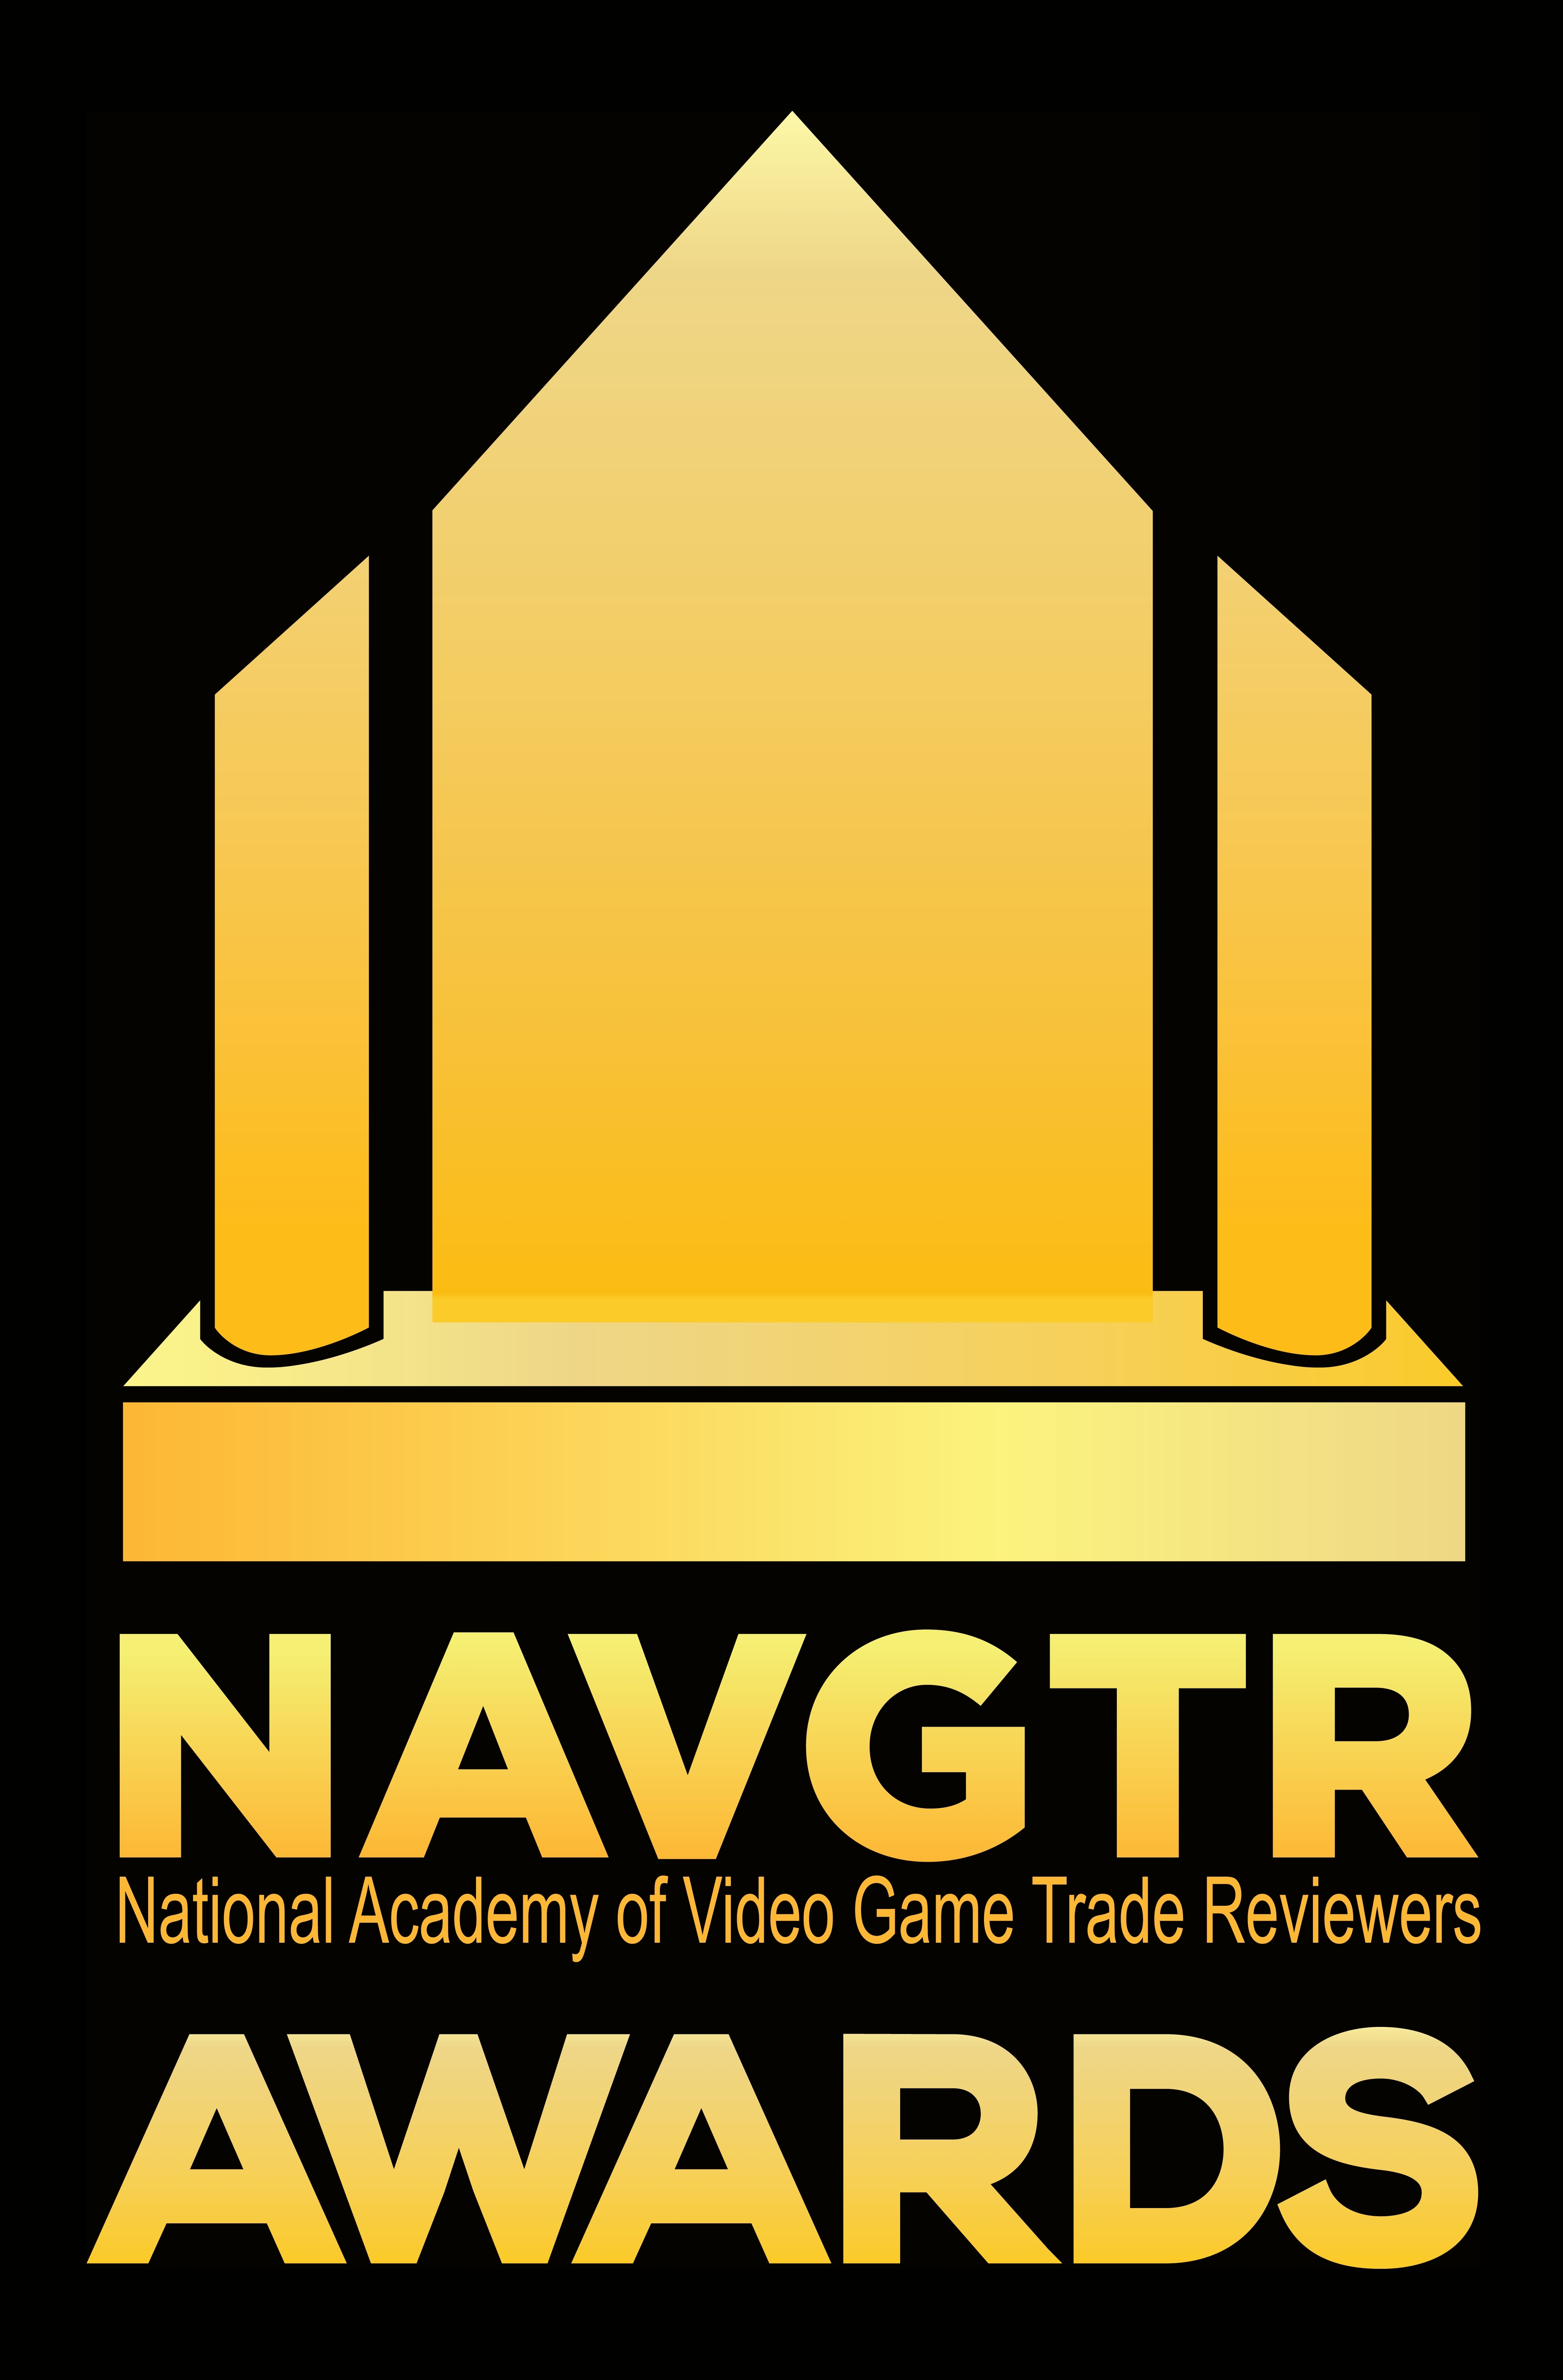 National Academy of Video Game Trade Reviewers / Navgtr